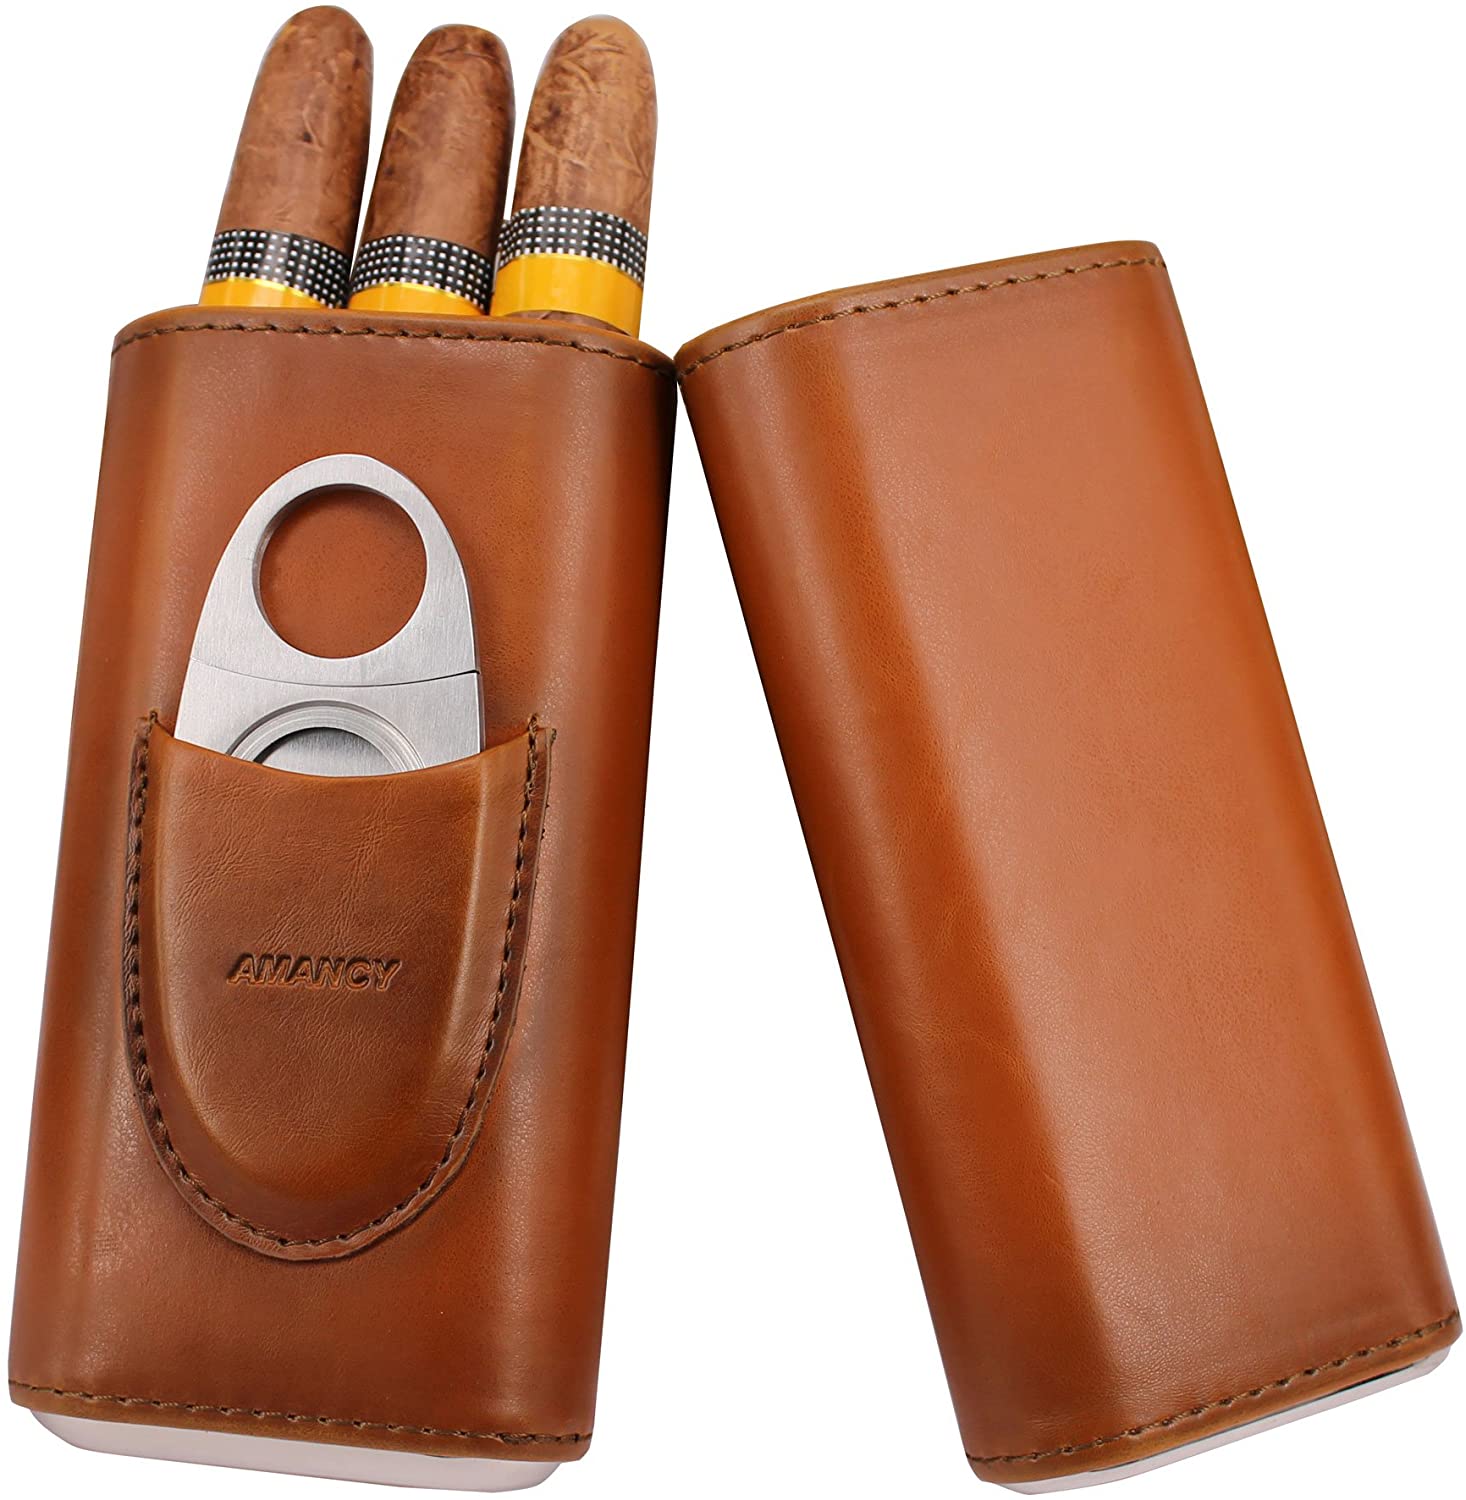 best small cigar travel case that fits in jacket